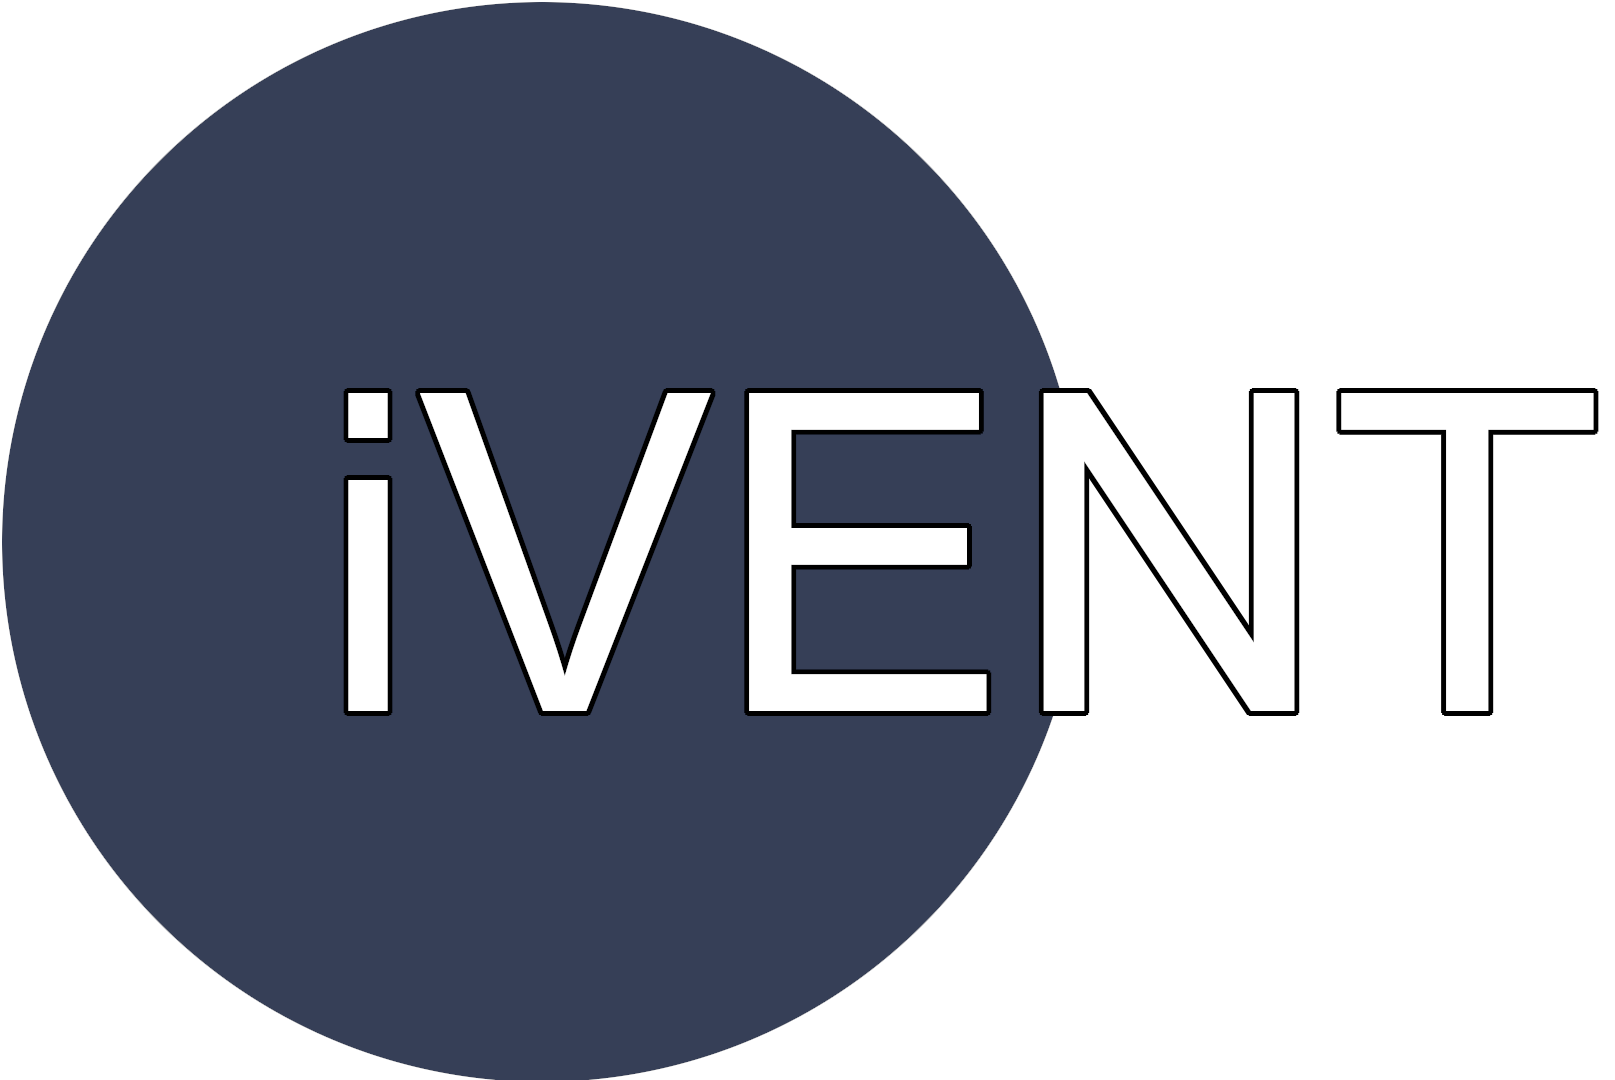 iVENT